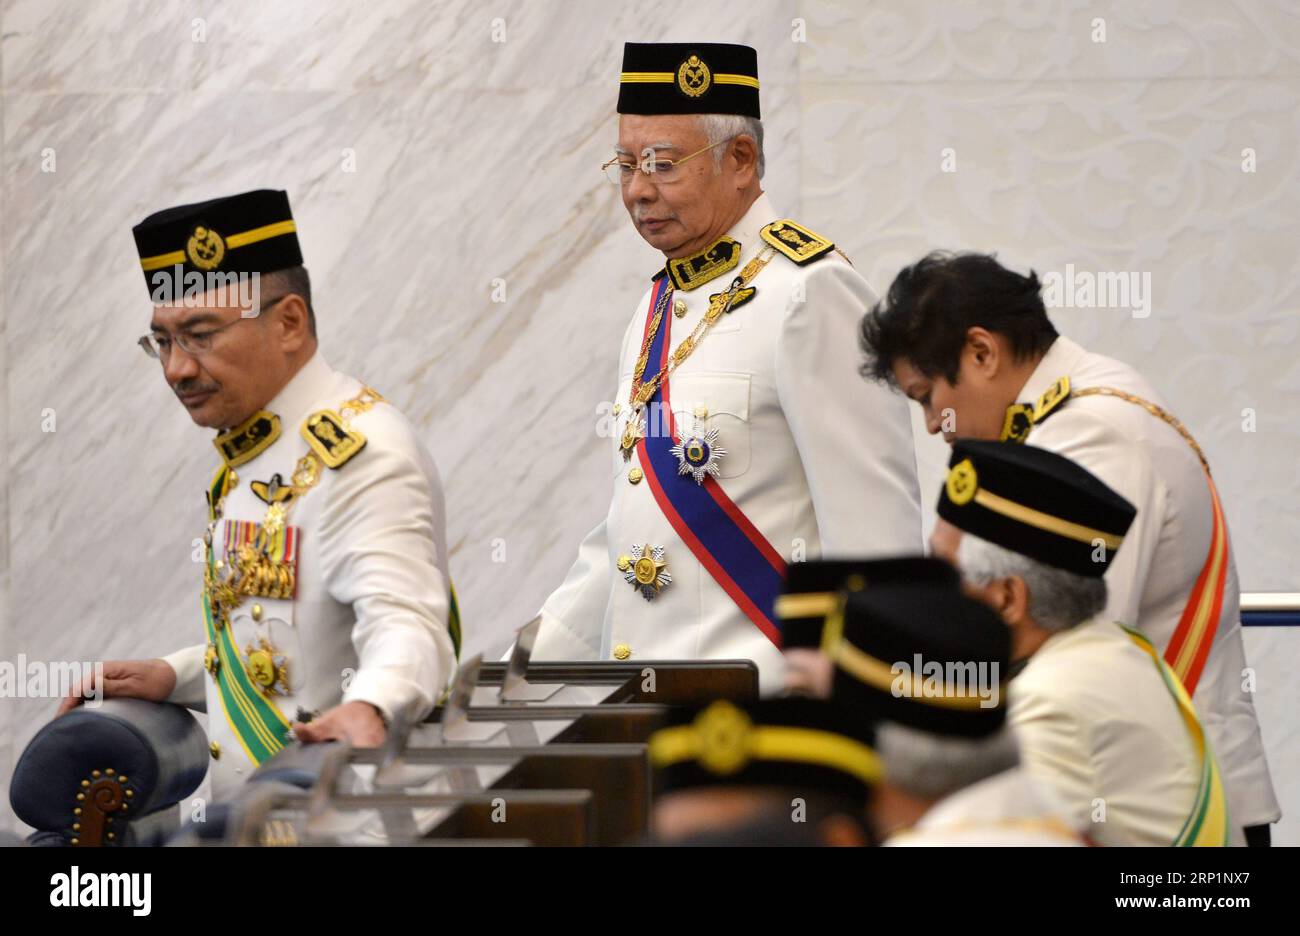 180717 -- KUALA LUMPUR, July 17, 2018 -- Former Malaysian Prime Minister Najib Razak C arrives at the parliament in Kuala Lumpur, Malaysia, on July 17, 2018. Malaysia s new parliament session officially inaugurated on Tuesday.  wtc MALAYSIA-KUALA LUMPUR-NEW PARLIAMENT SESSION ChongxVoonxChung PUBLICATIONxNOTxINxCHN Stock Photo